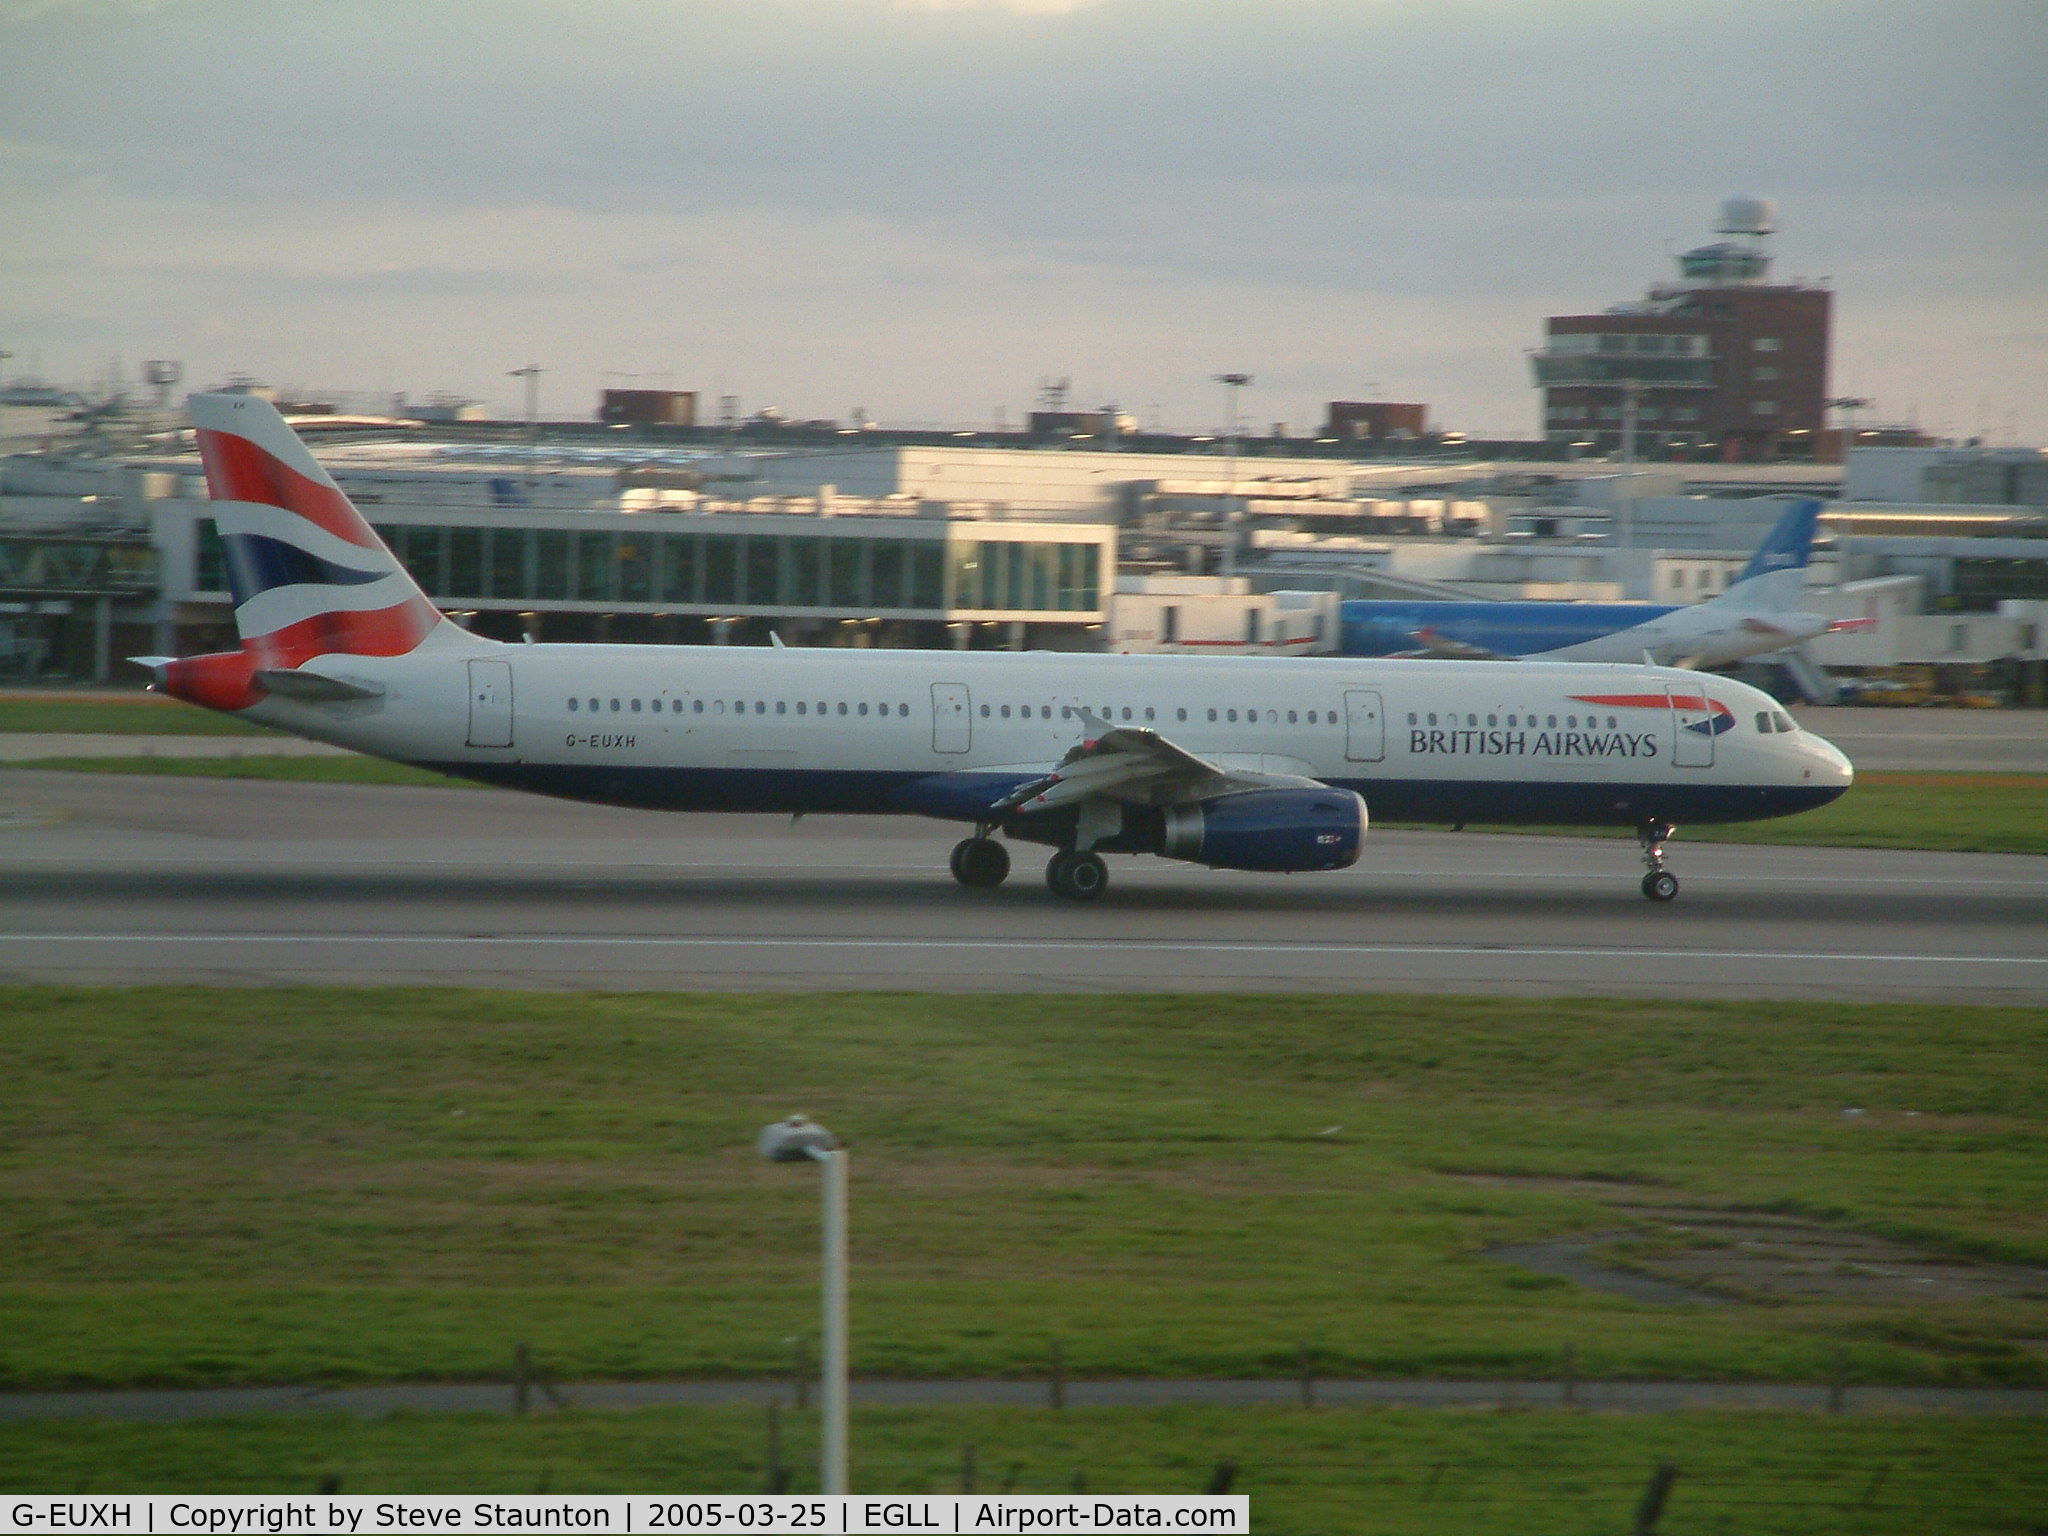 G-EUXH, 2004 Airbus A321-231 C/N 2363, Taken at Heathrow Airport March 2005